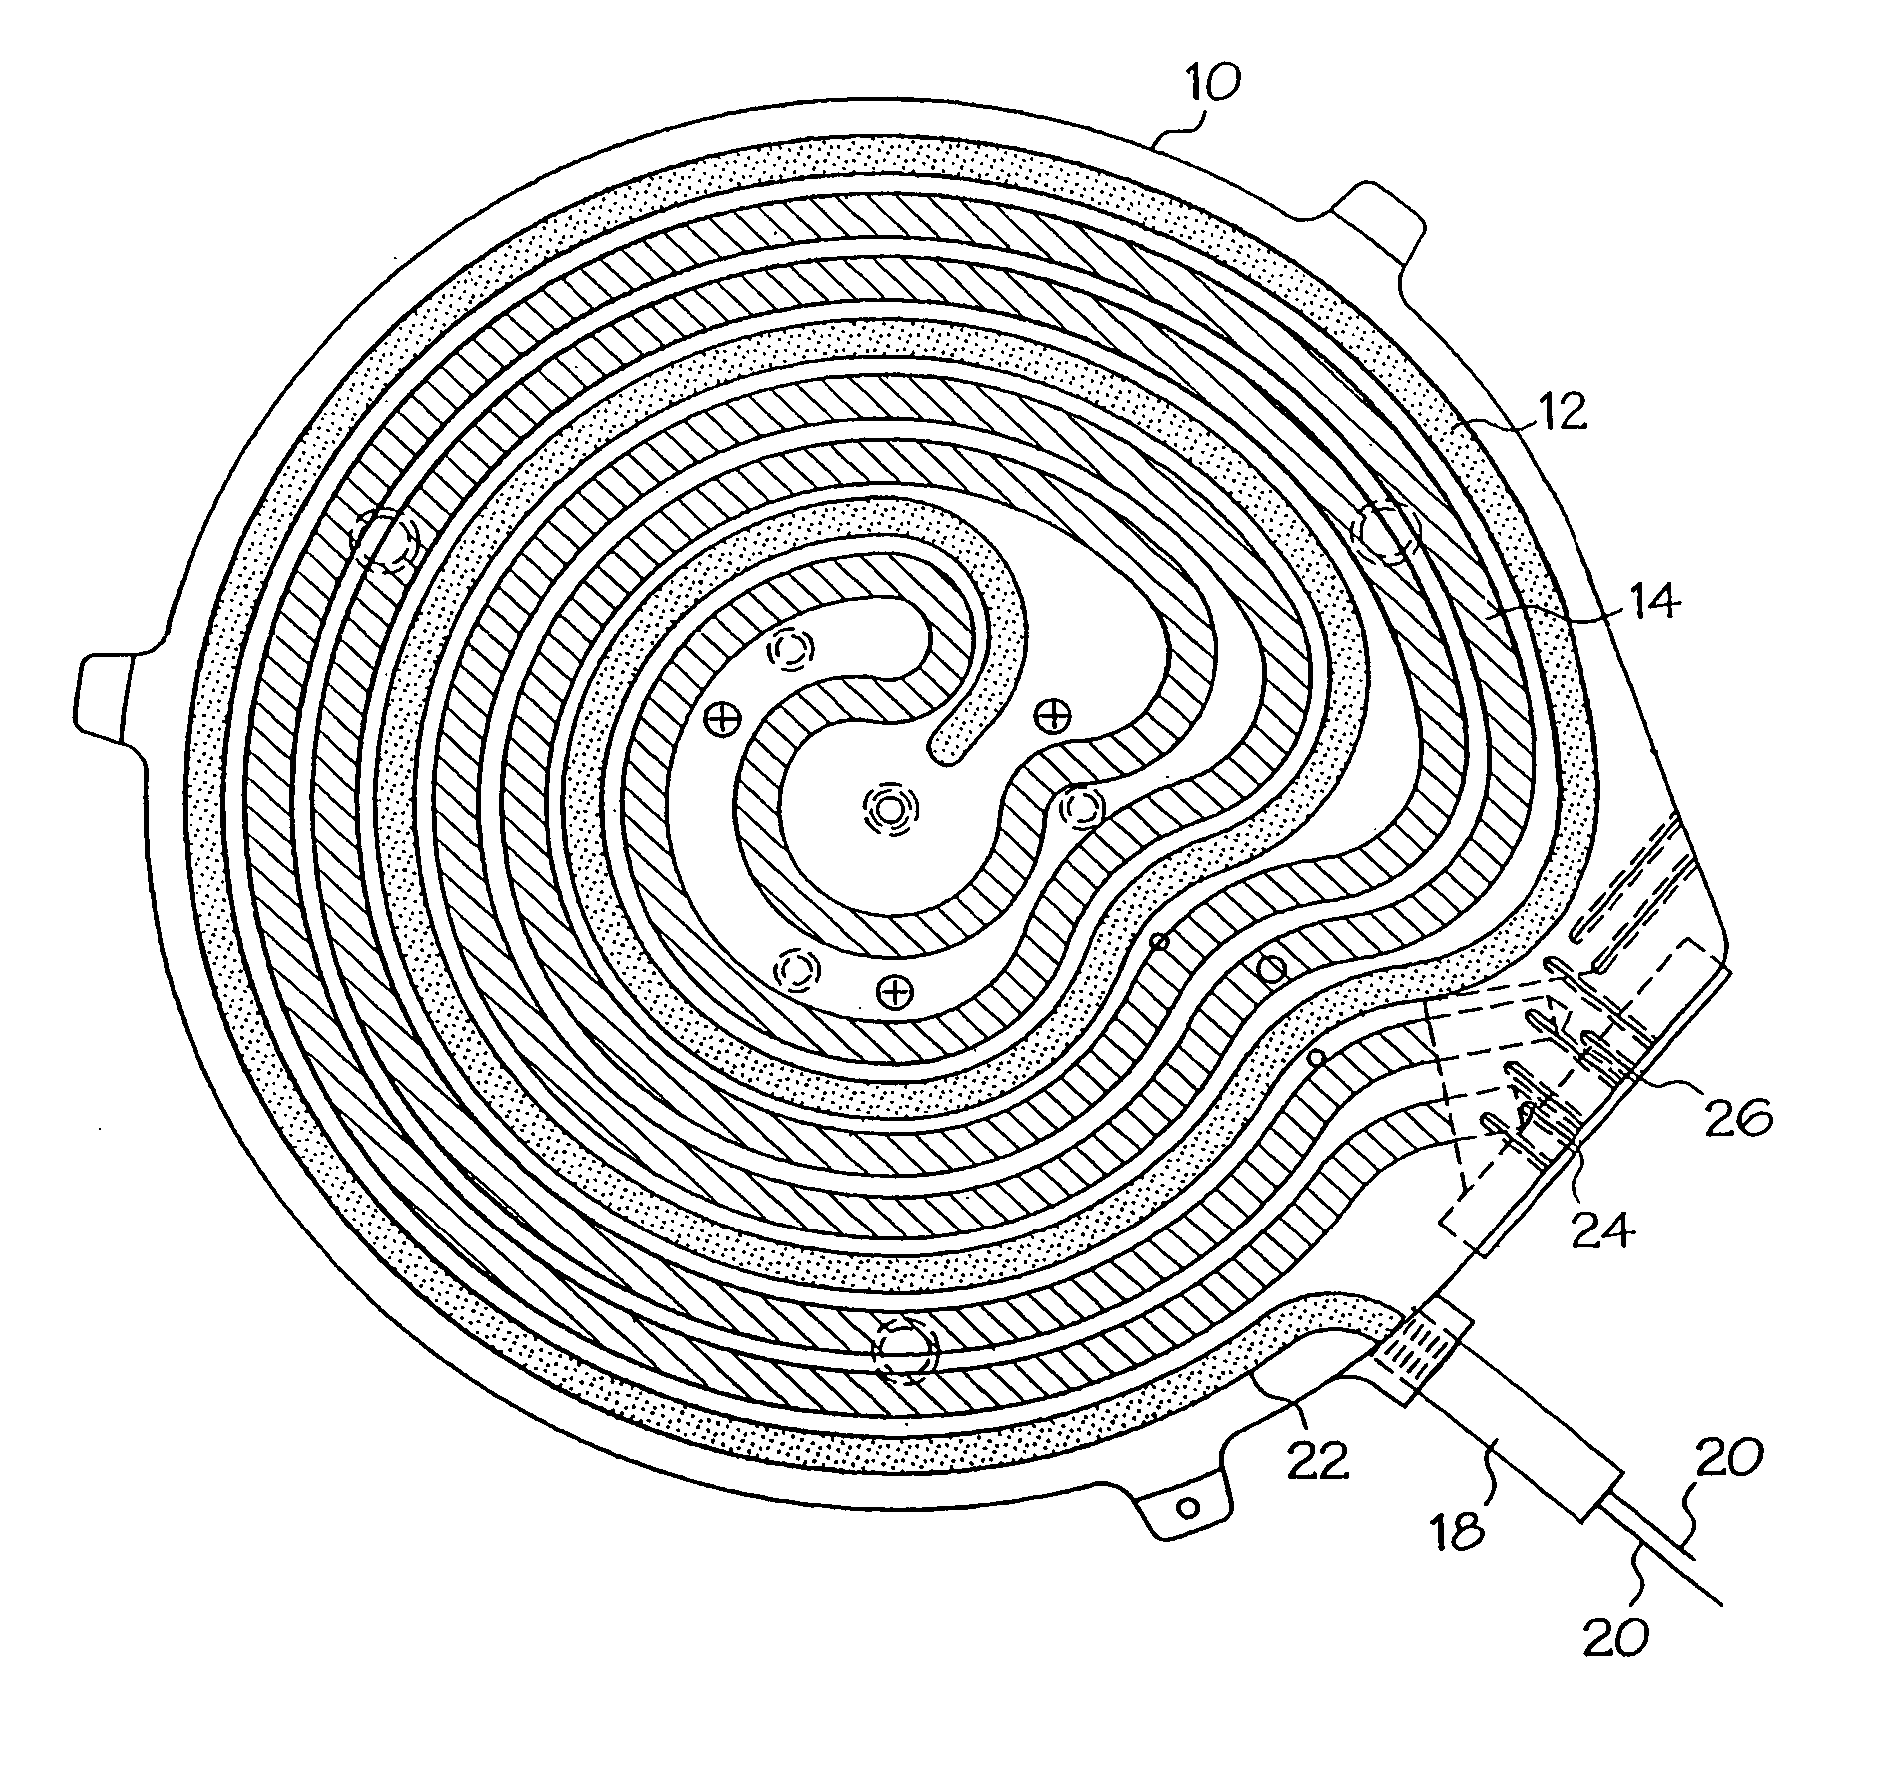 Wafer chuck having thermal plate with interleaved heating and cooling elements